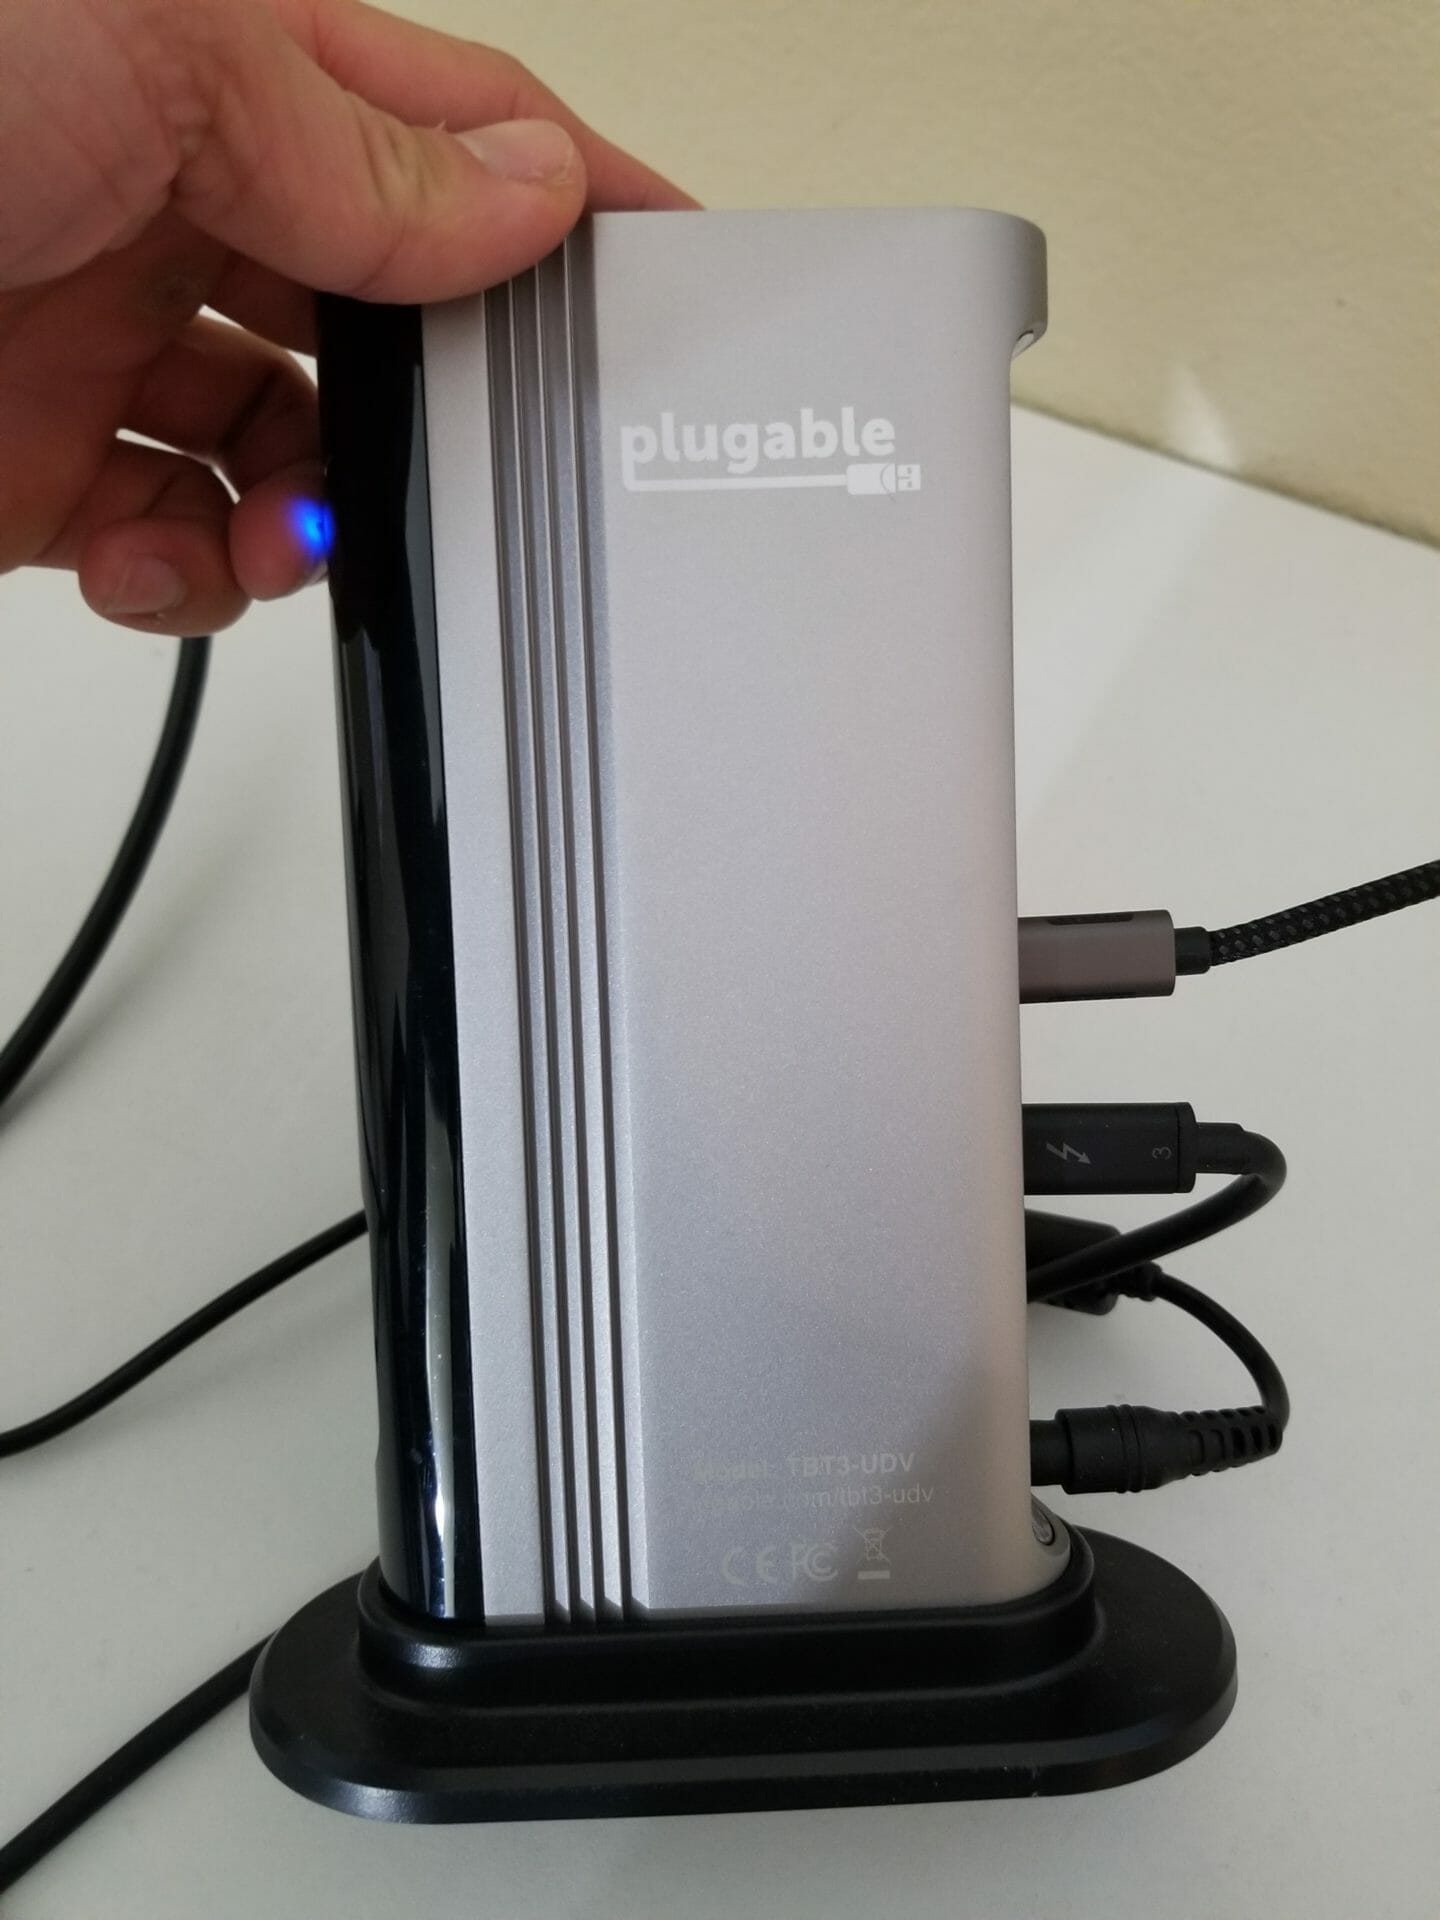 plugable docking station connected to macbook